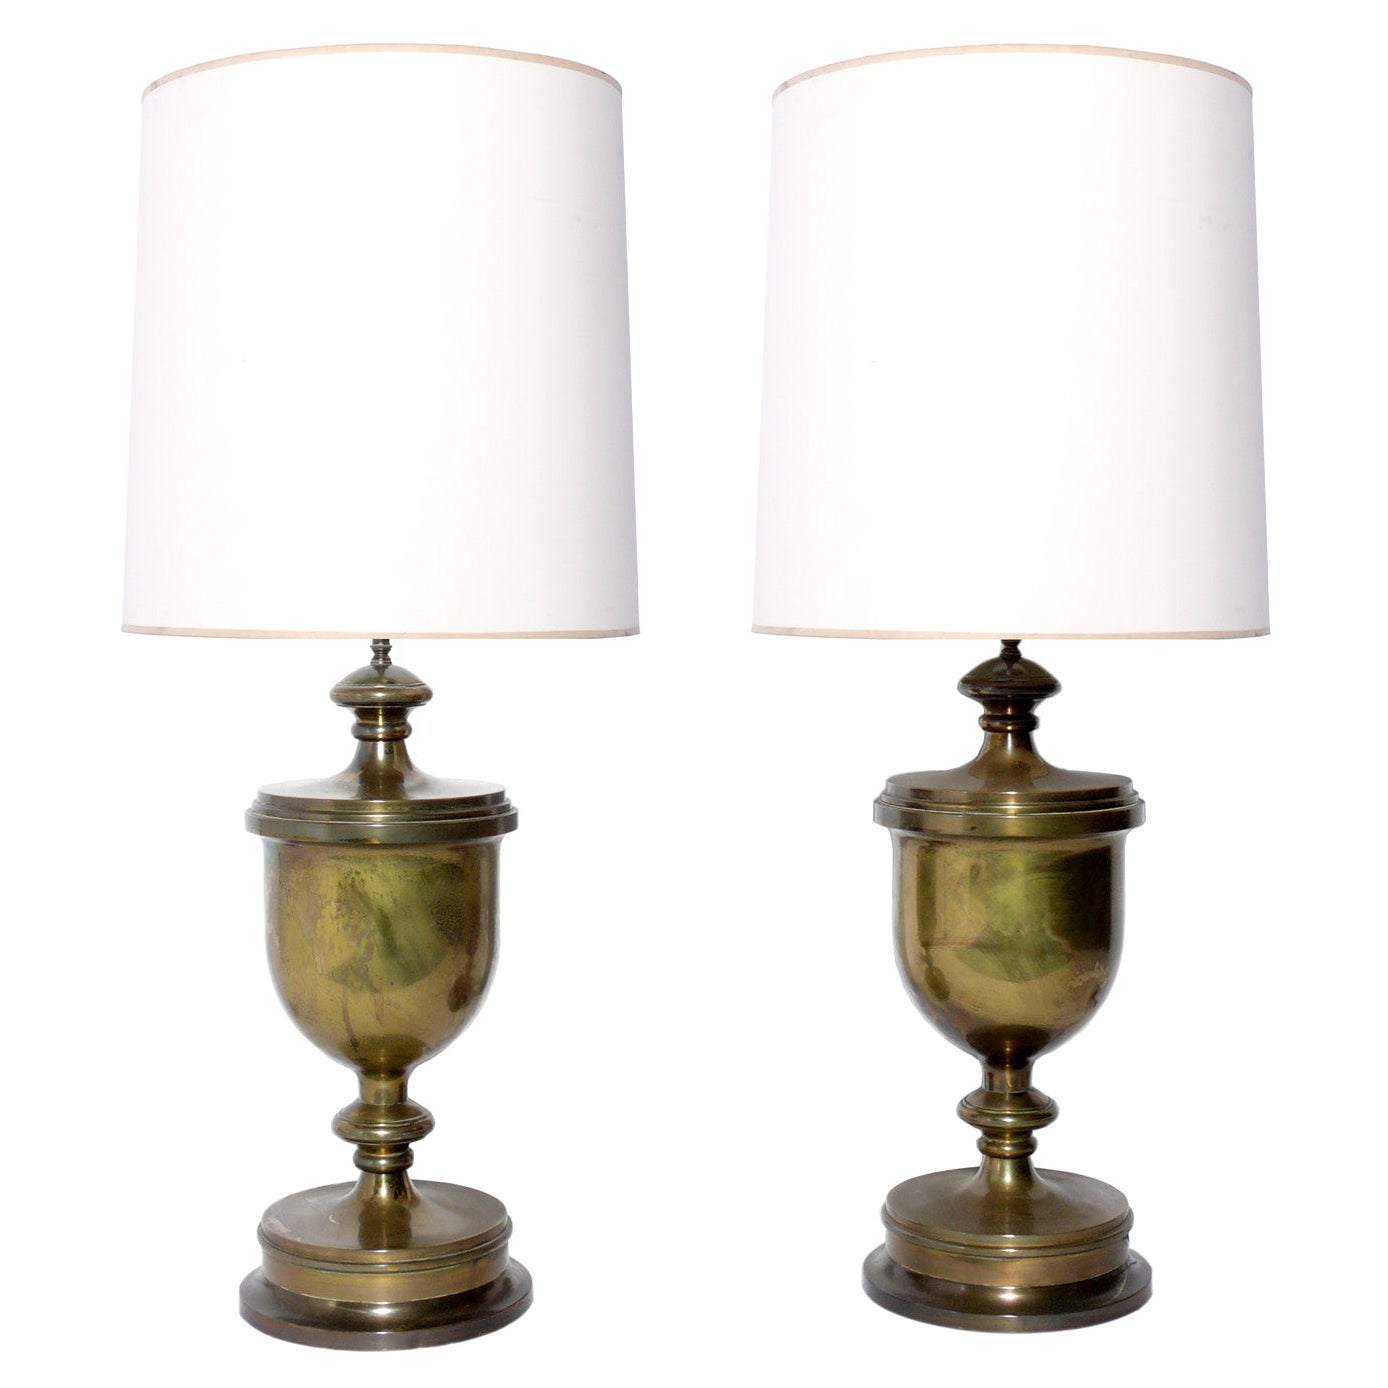 Large Scale English Brass Urn Lamps For Sale